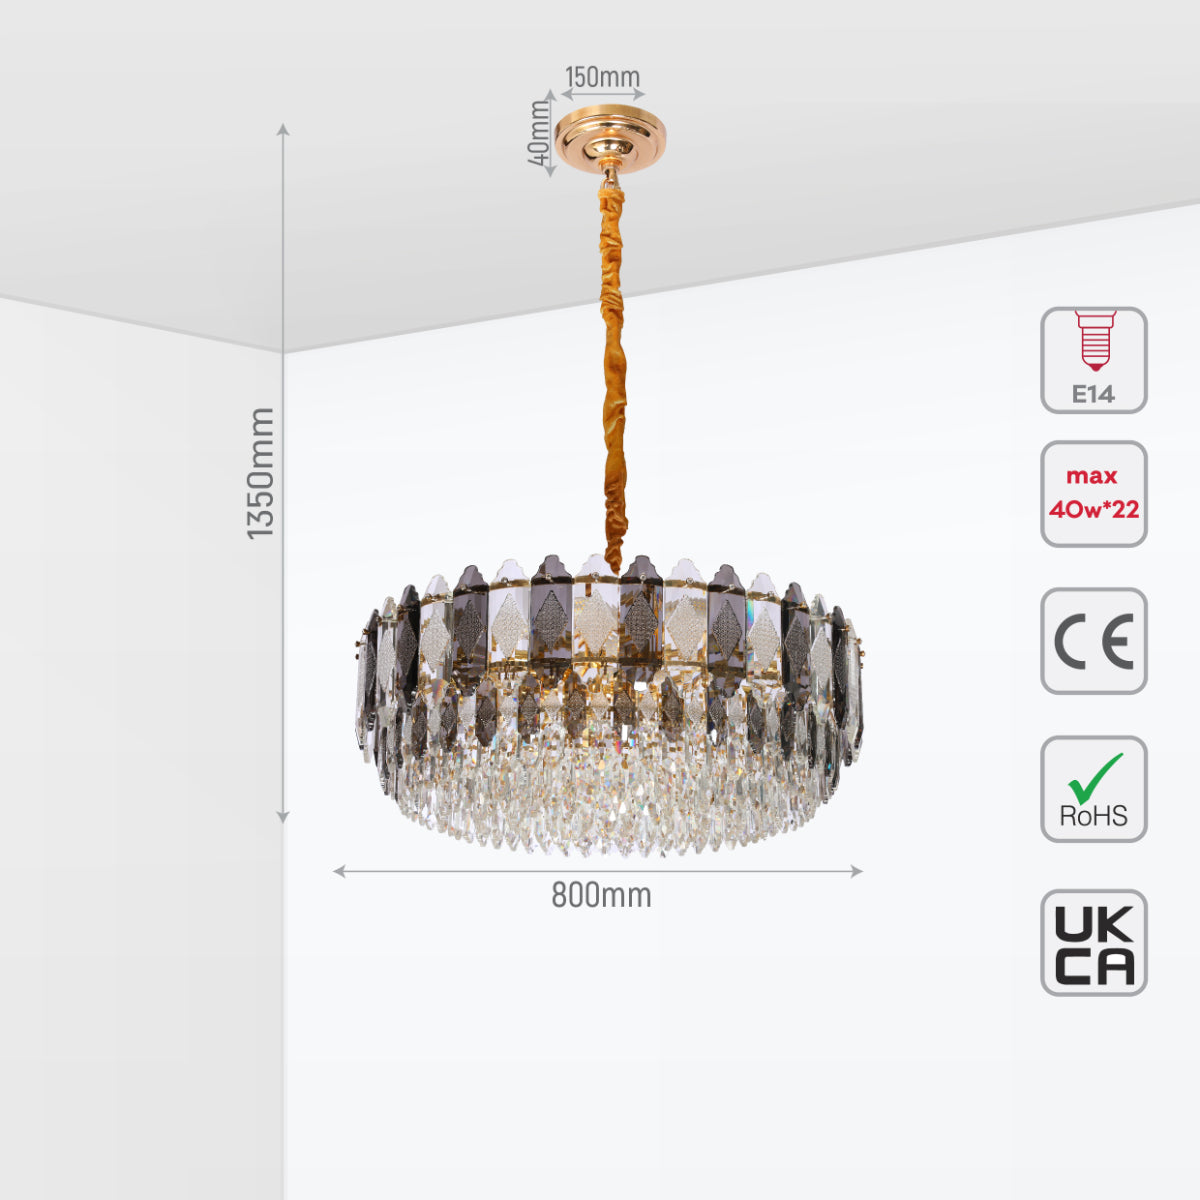 Size and certifications of Deluxe Smoky Clear Crystal Modern Chandelier Light Gold | TEKLED  159-18004